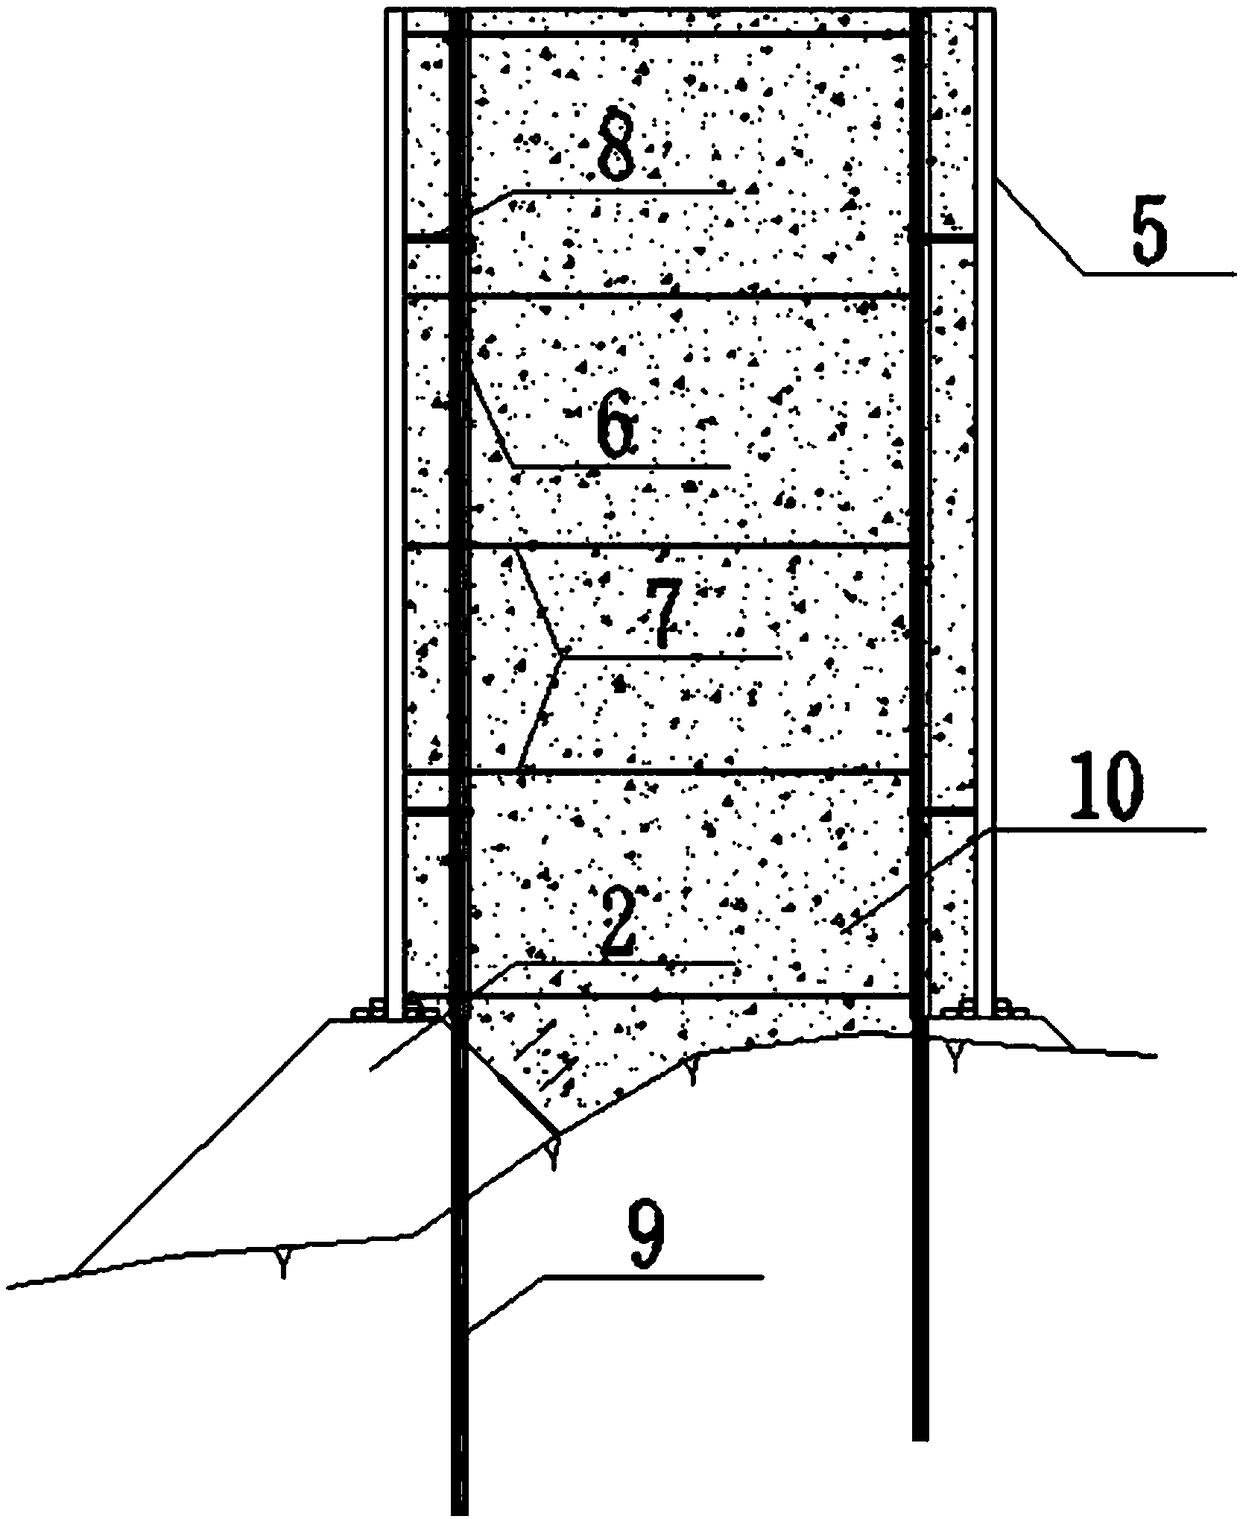 A bottomless steel casing cast-in-place concrete diversion cofferdam and its construction method